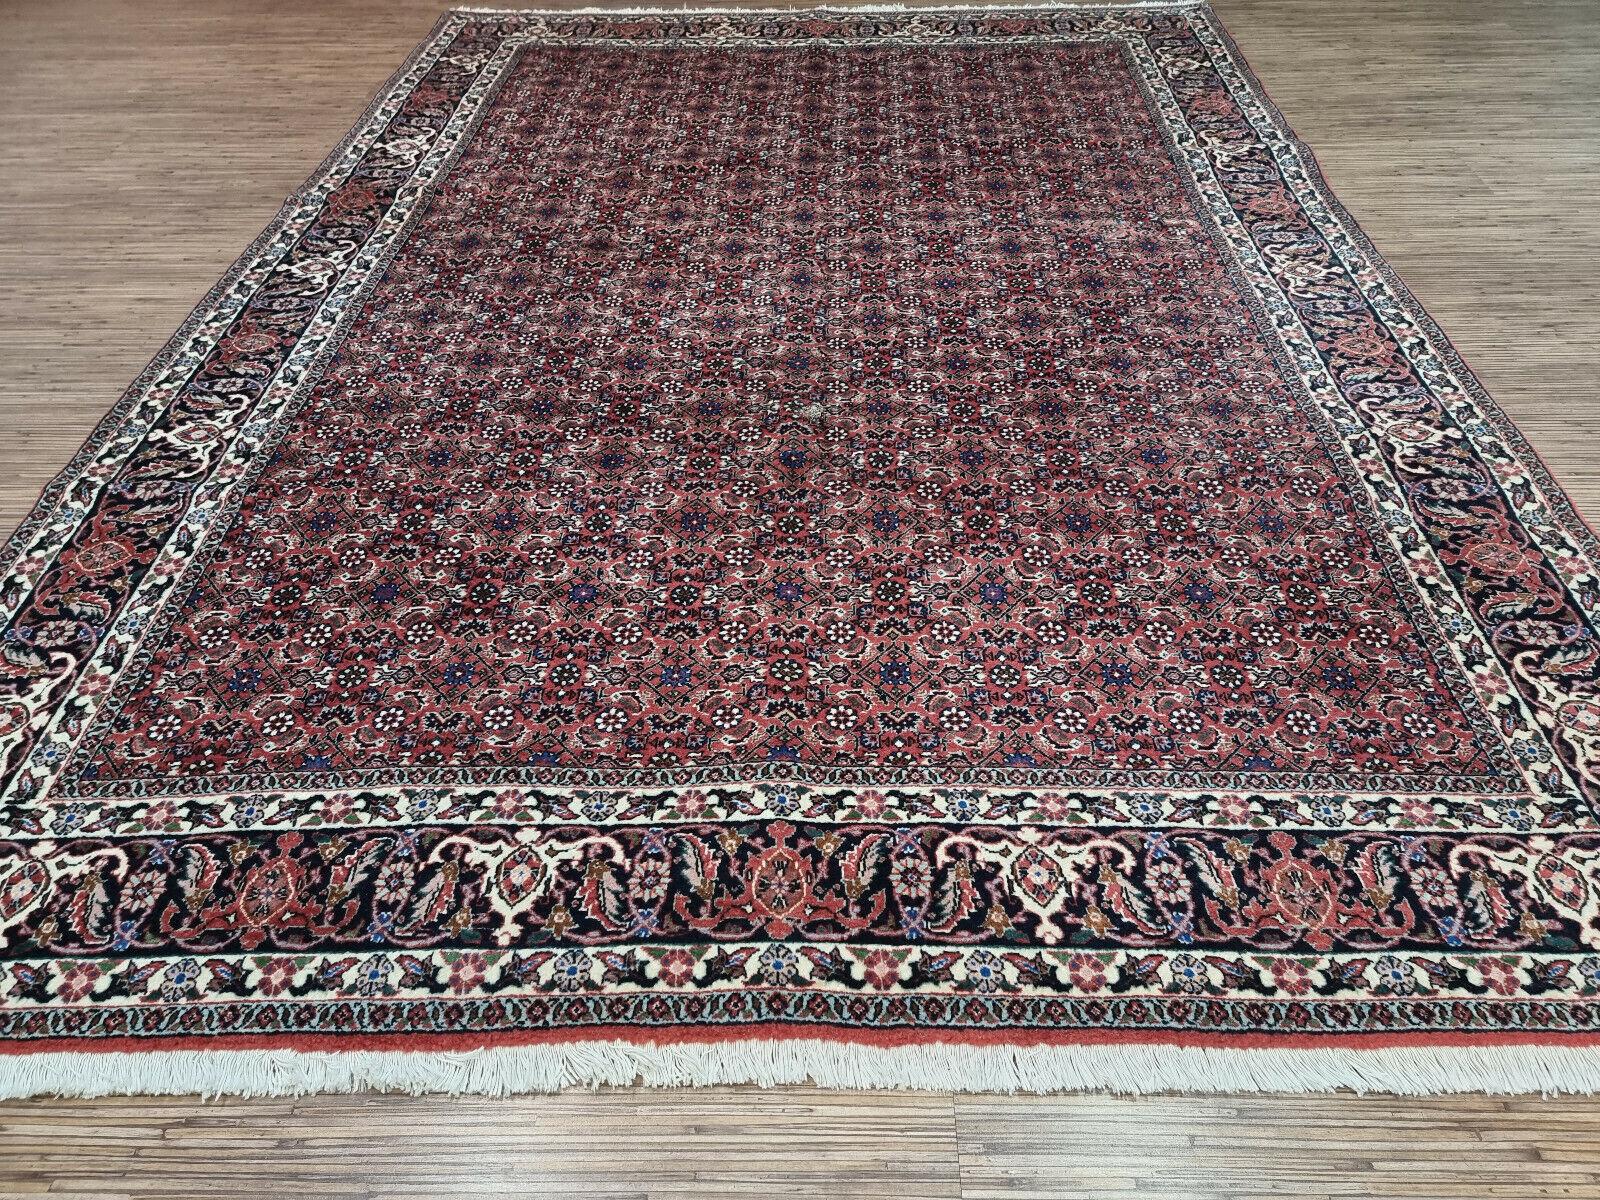 Hand-Knotted Handmade Vintage Persian Style Bidjar Rug 5.7' x 7.8', 1970s - 1D95 For Sale